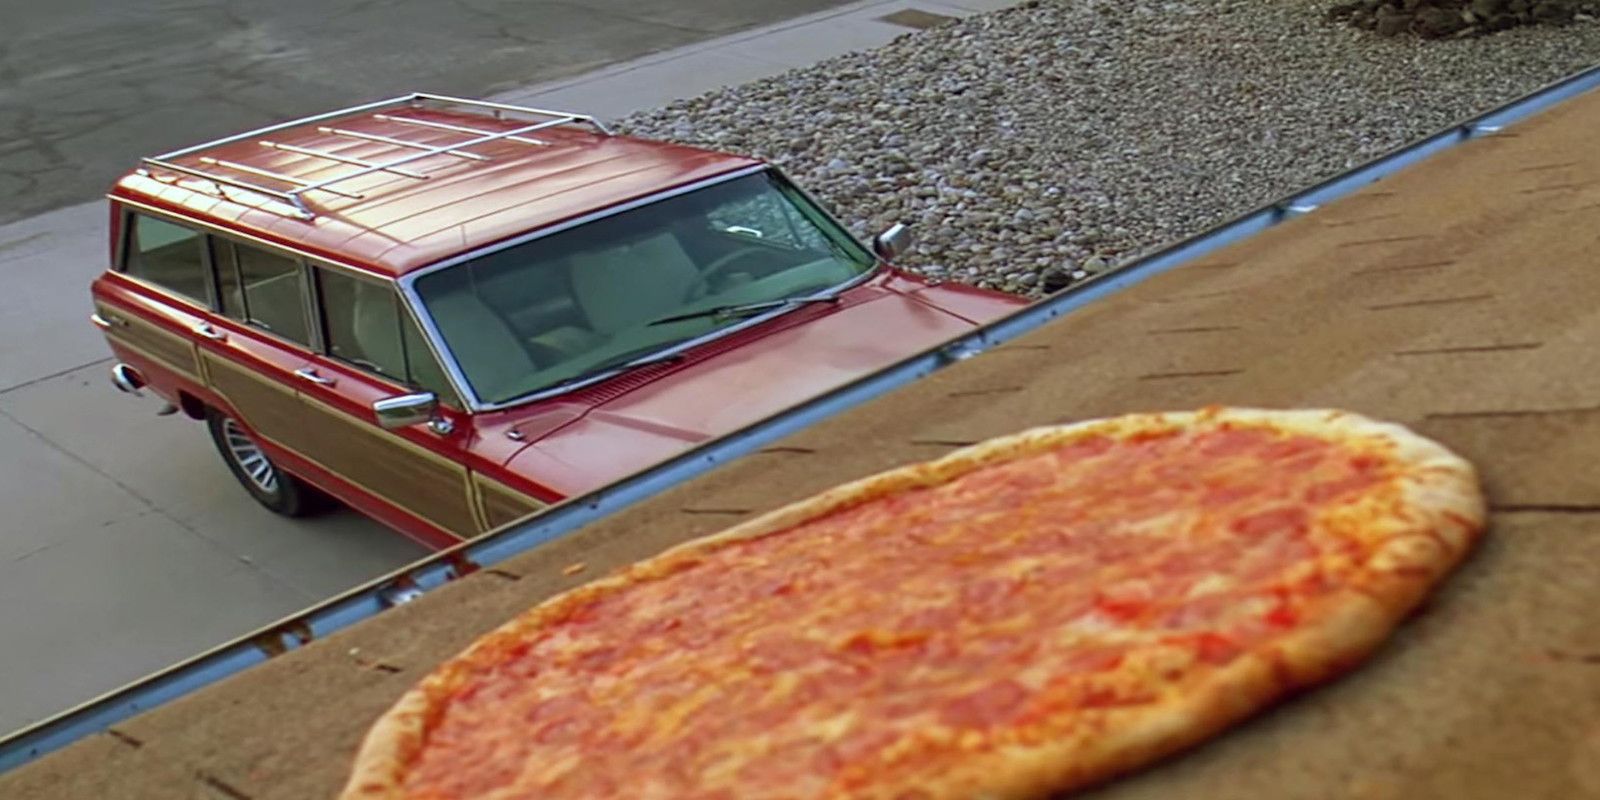 Breaking Bad Pizza On Roof